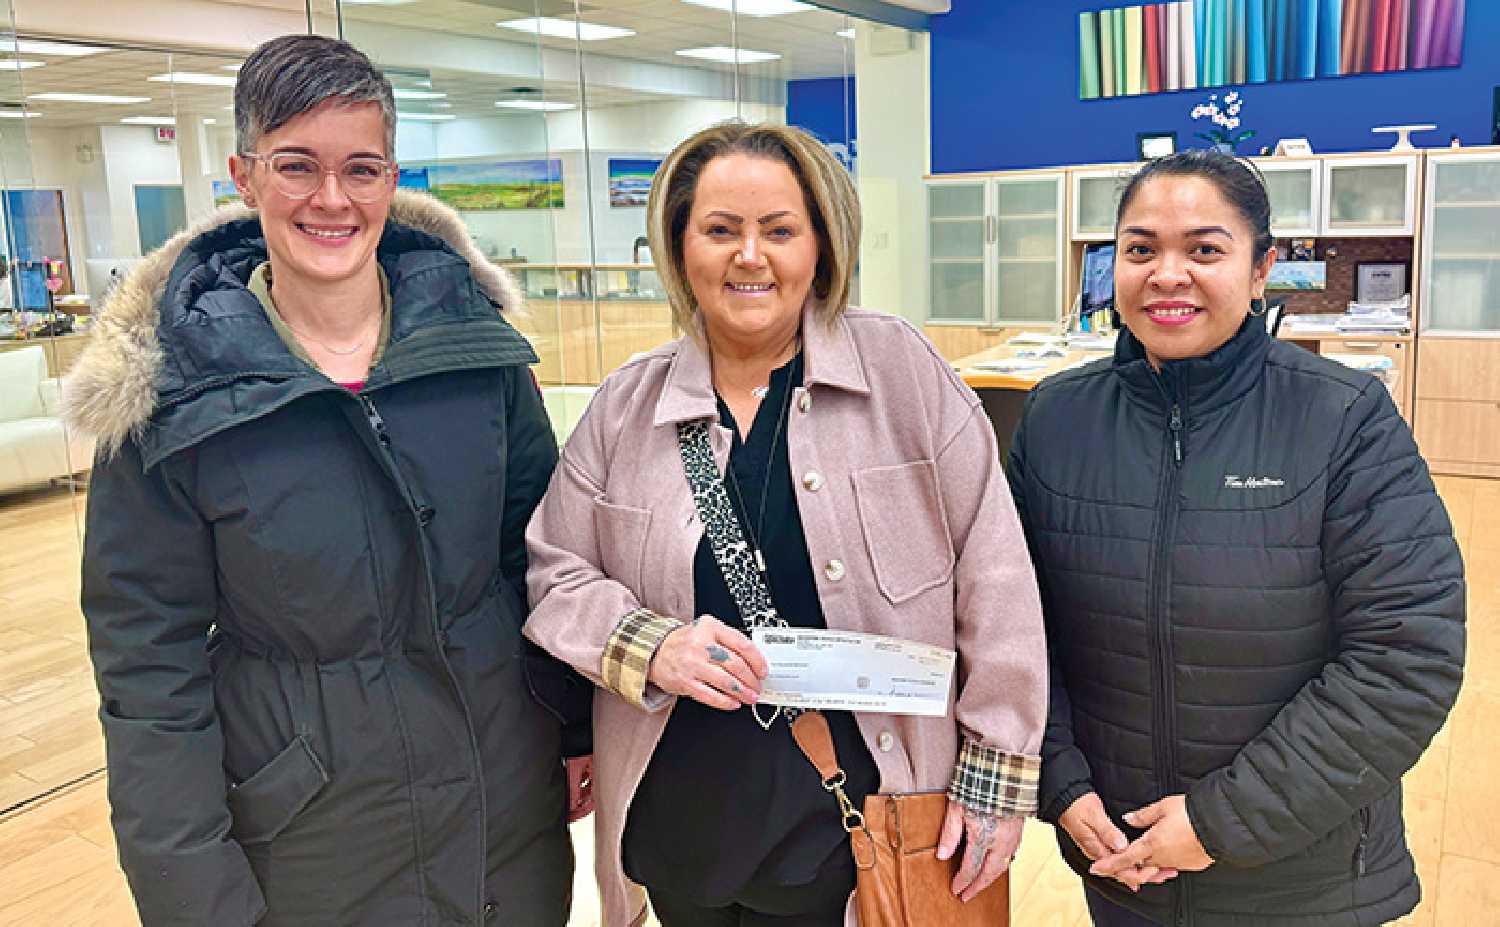 From left are Amy Leduc and Terri Lowe with Play Fair Daycare, and Cherri Caliwag from Tim Hortons with the cheque from the World-Spectator.